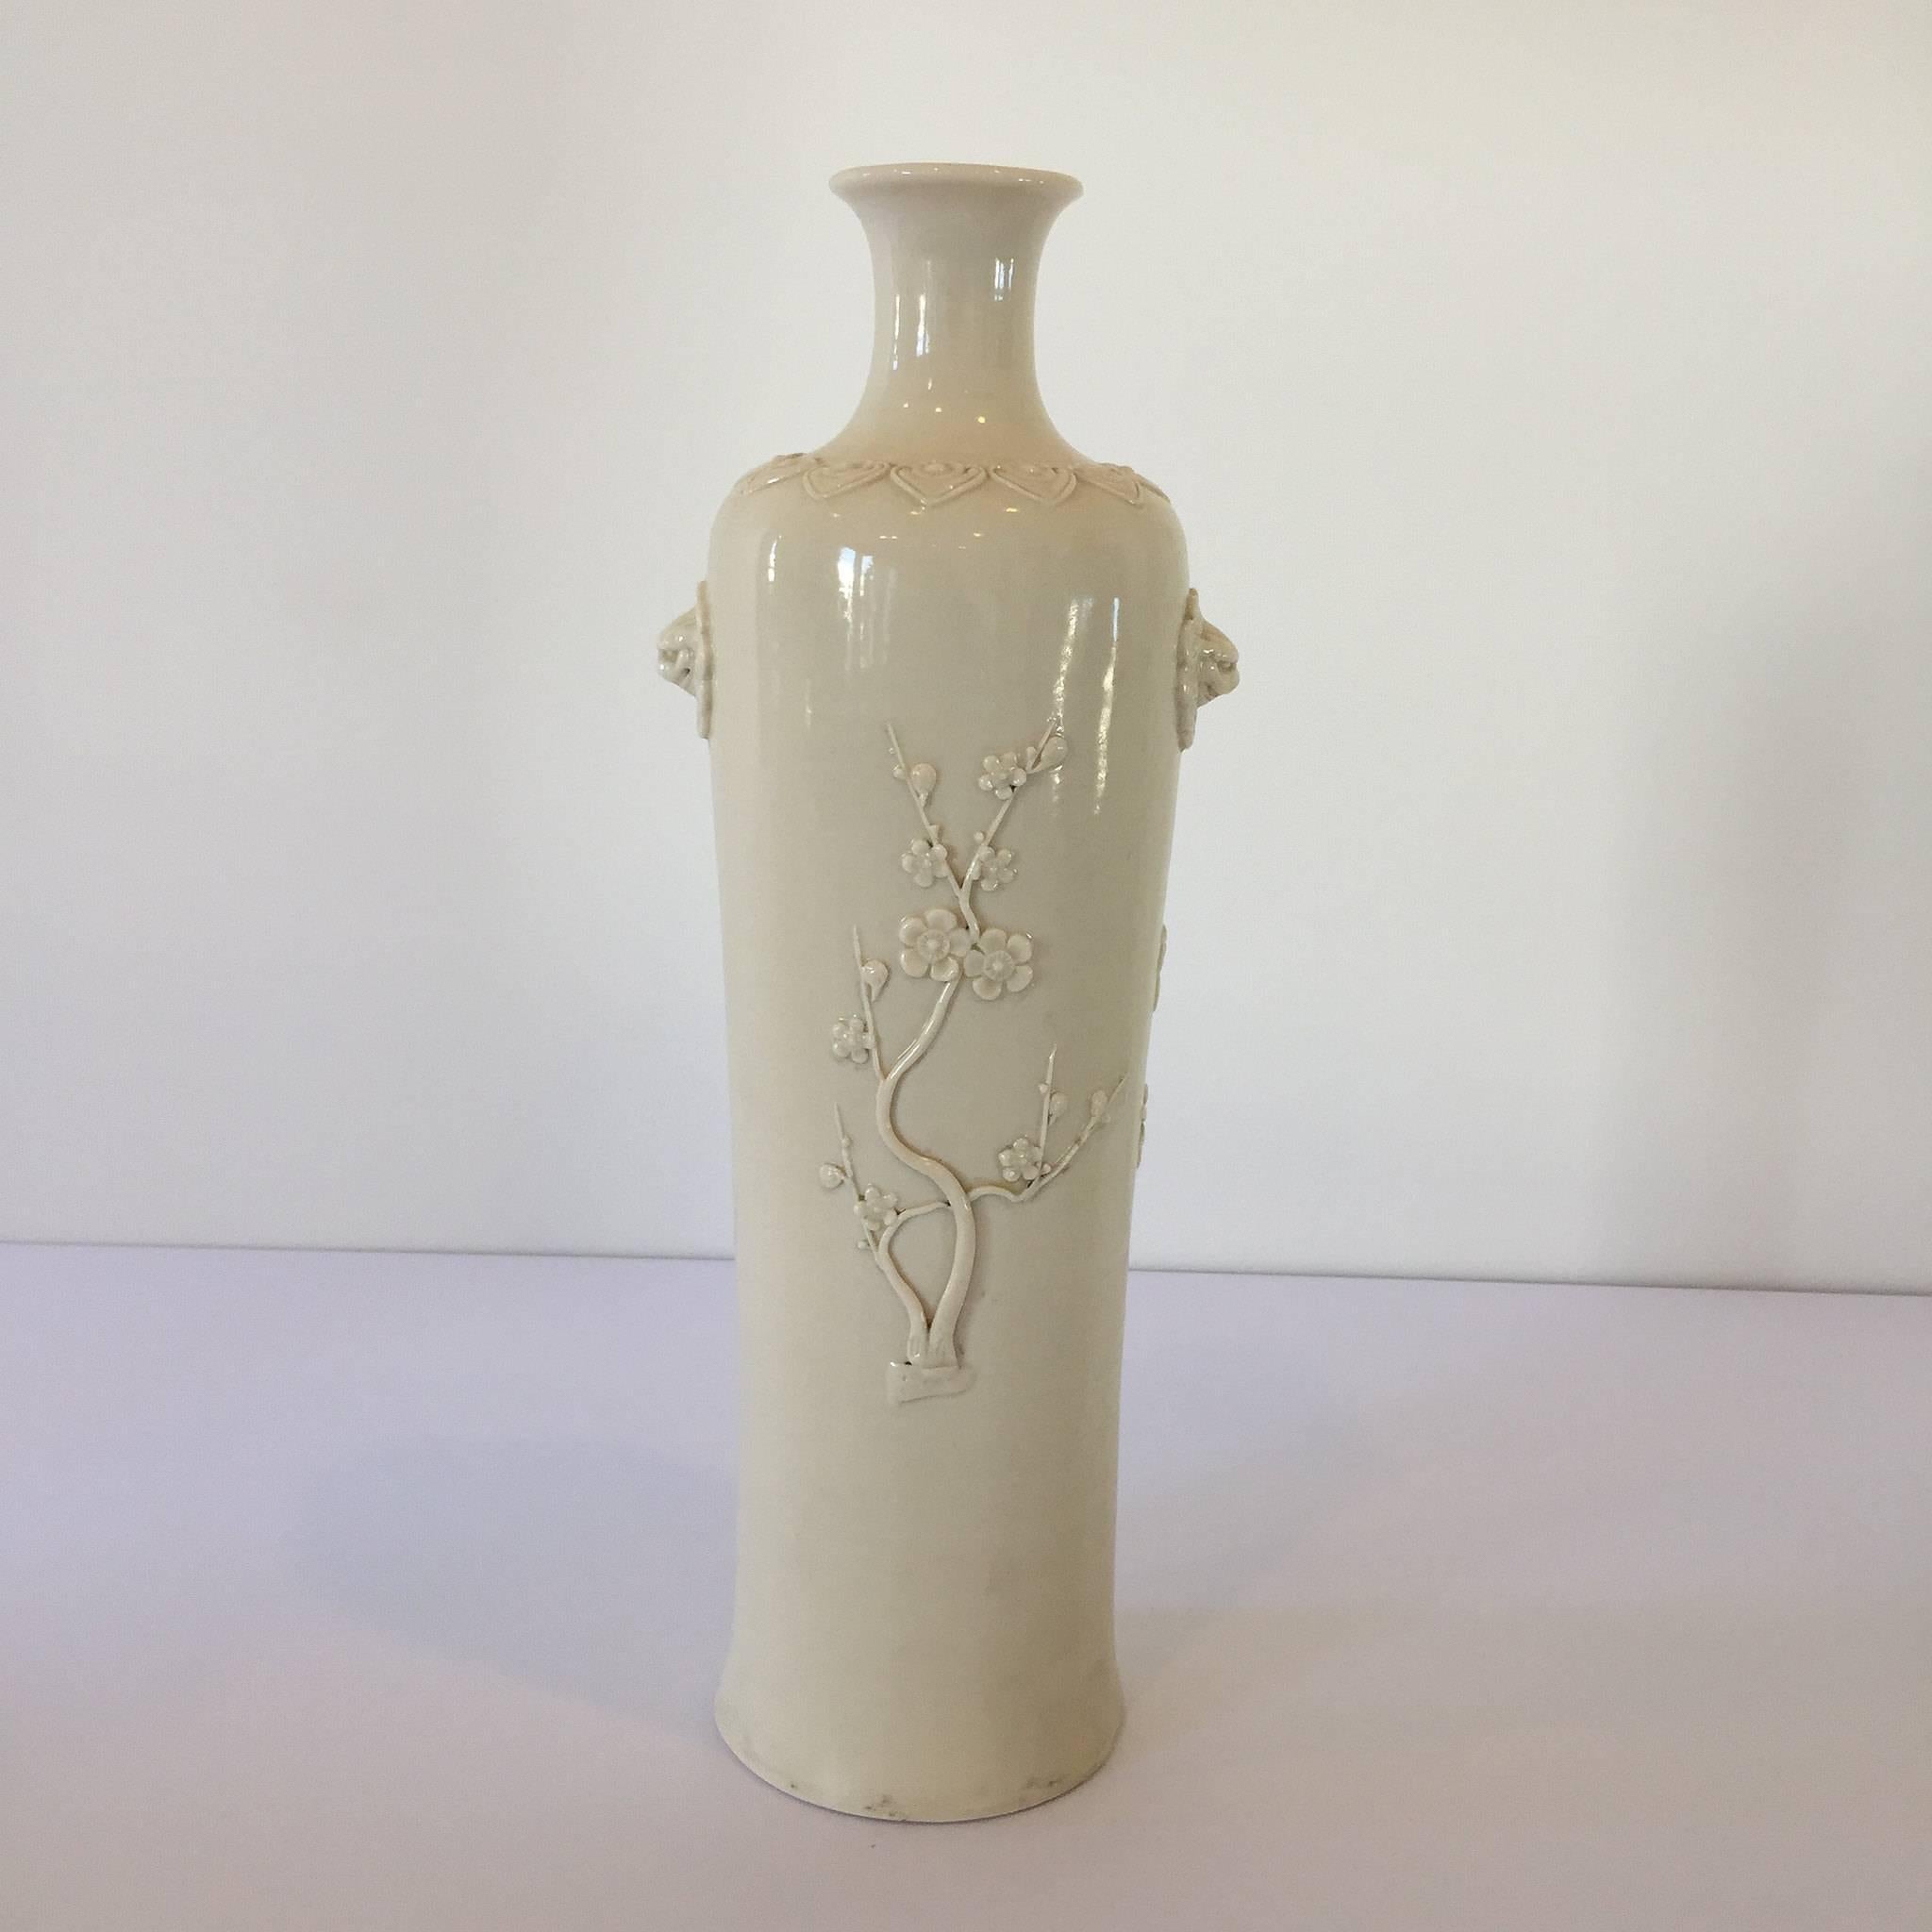 A beautiful Chinese Deco white porcelain cherry blossom sleeve vase. This Rolwagen signed vase features cherry blossoms on from and back, mixed foliage/bamboo leaves, and a pair of lion heads.